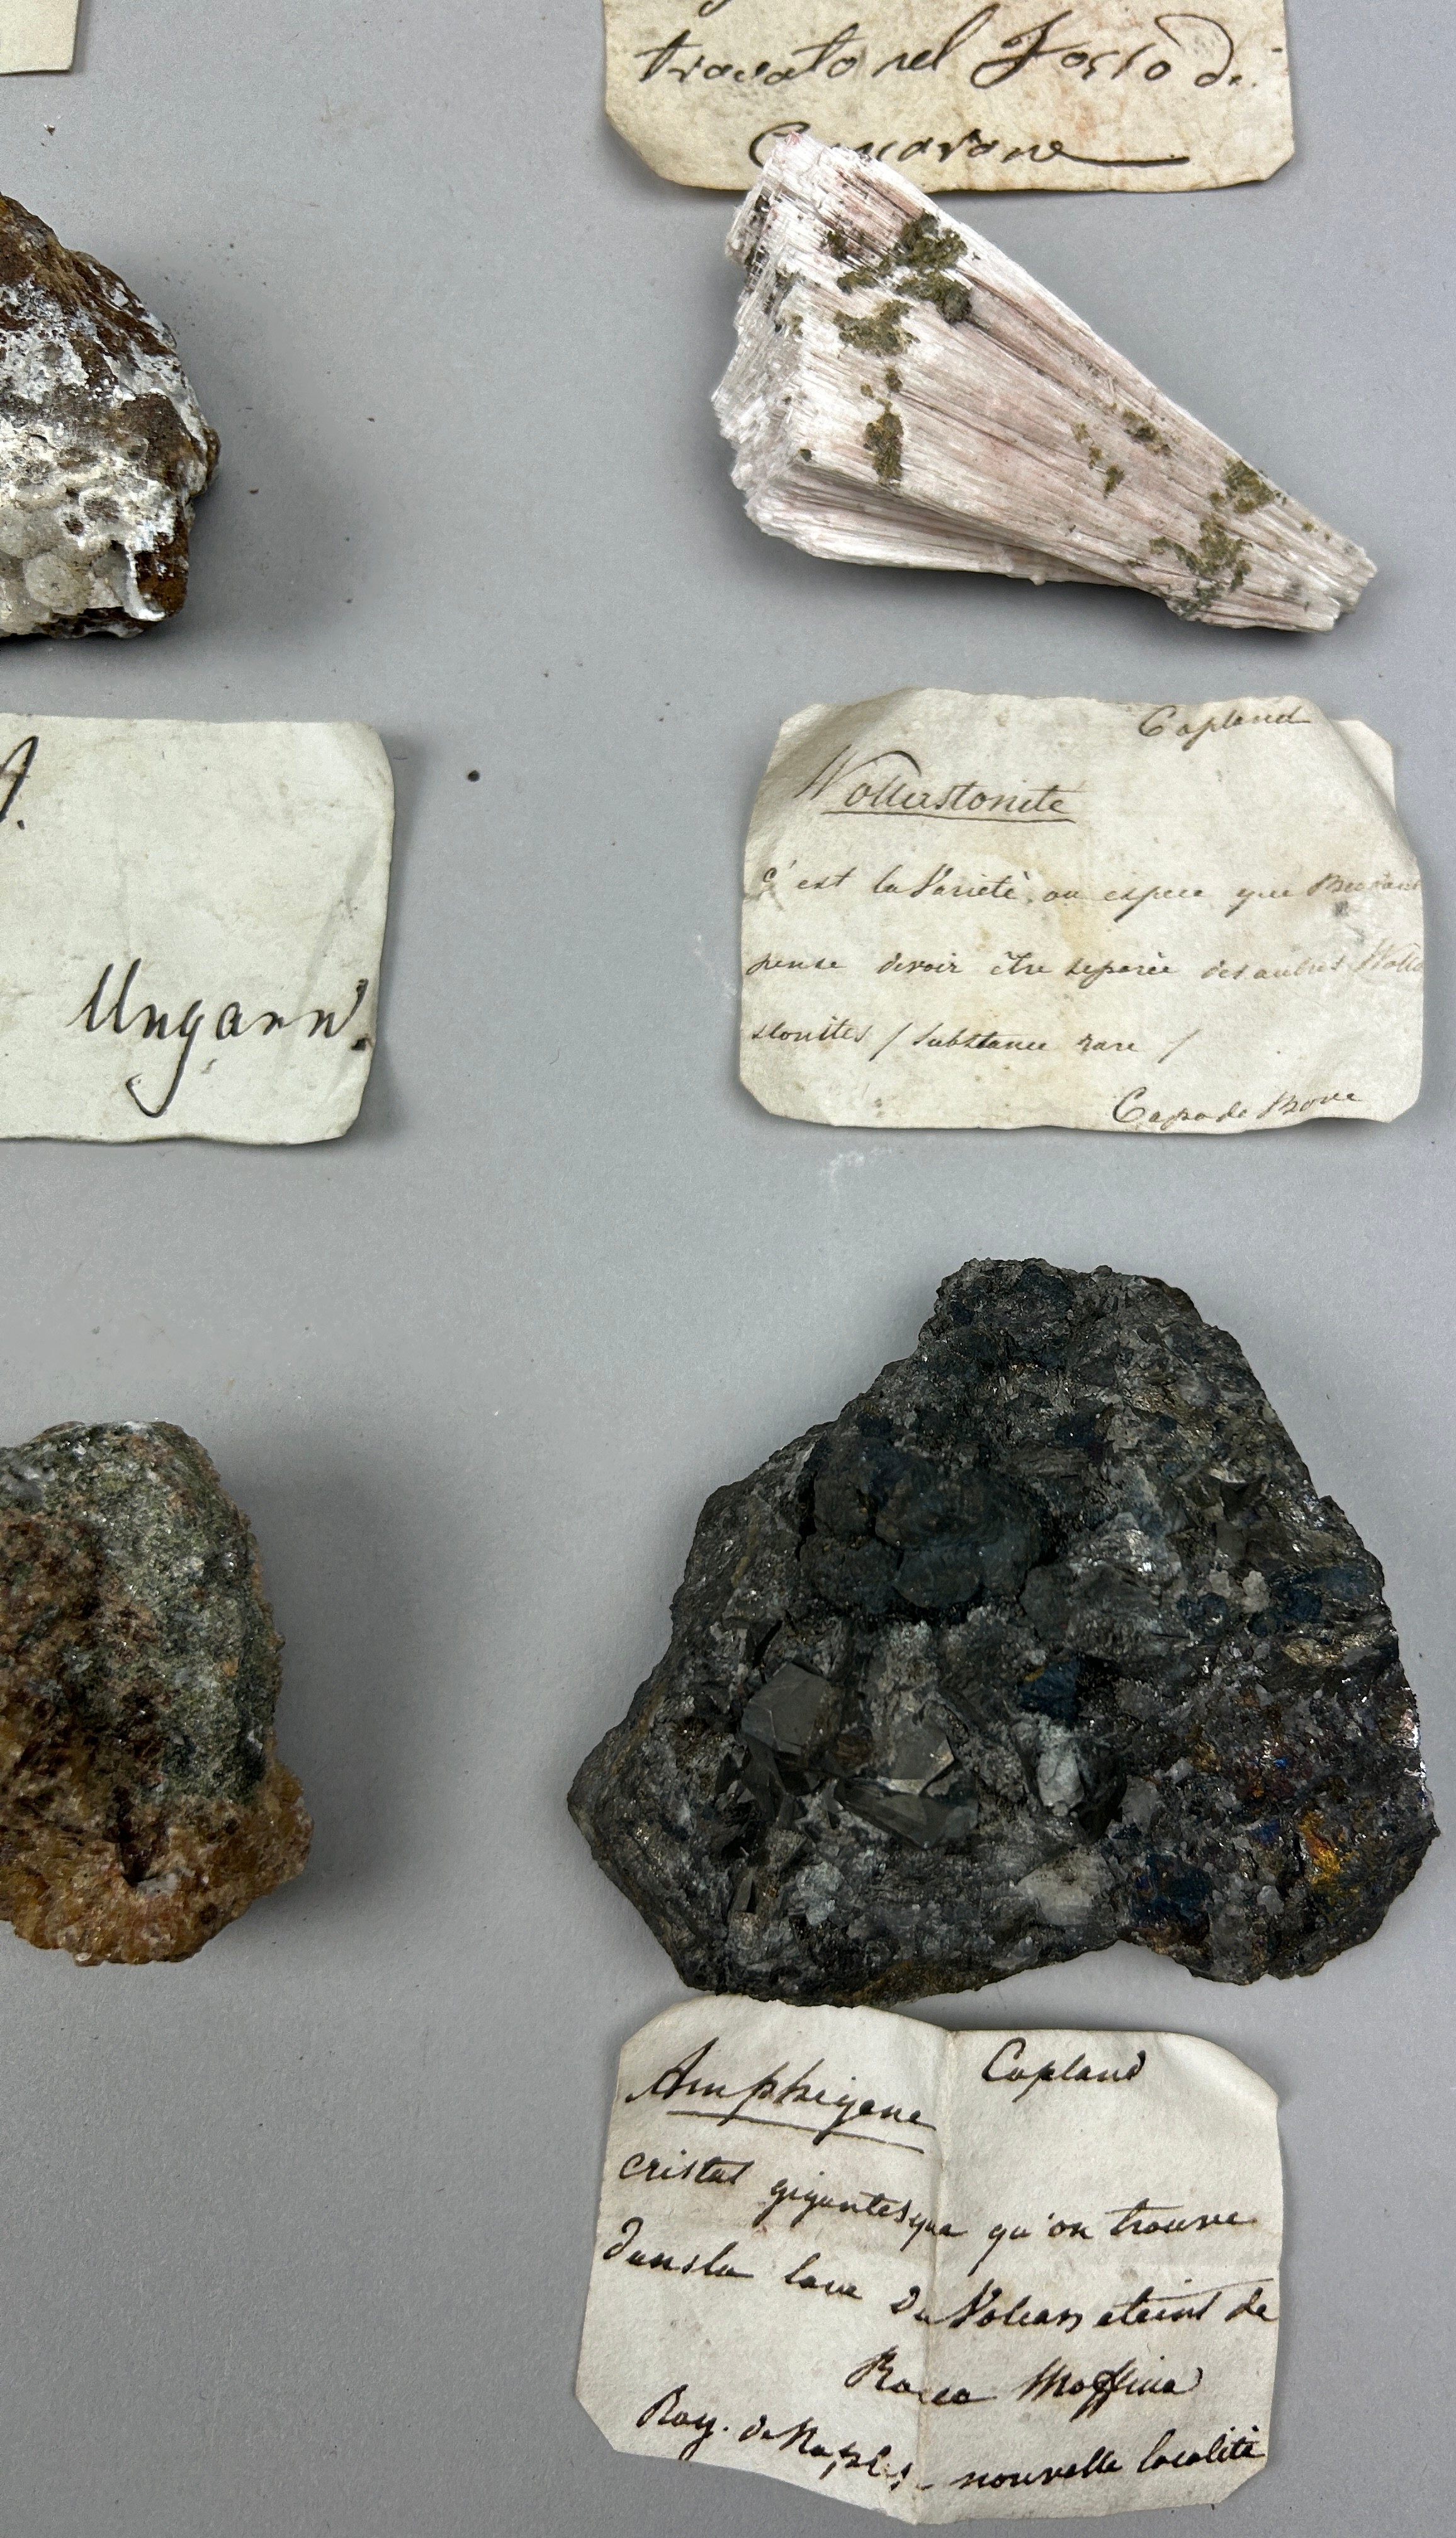 A RARE CABINET COLLECTION OF MINERALS CIRCA 1810-1860, including minerals probably collected by - Image 5 of 33